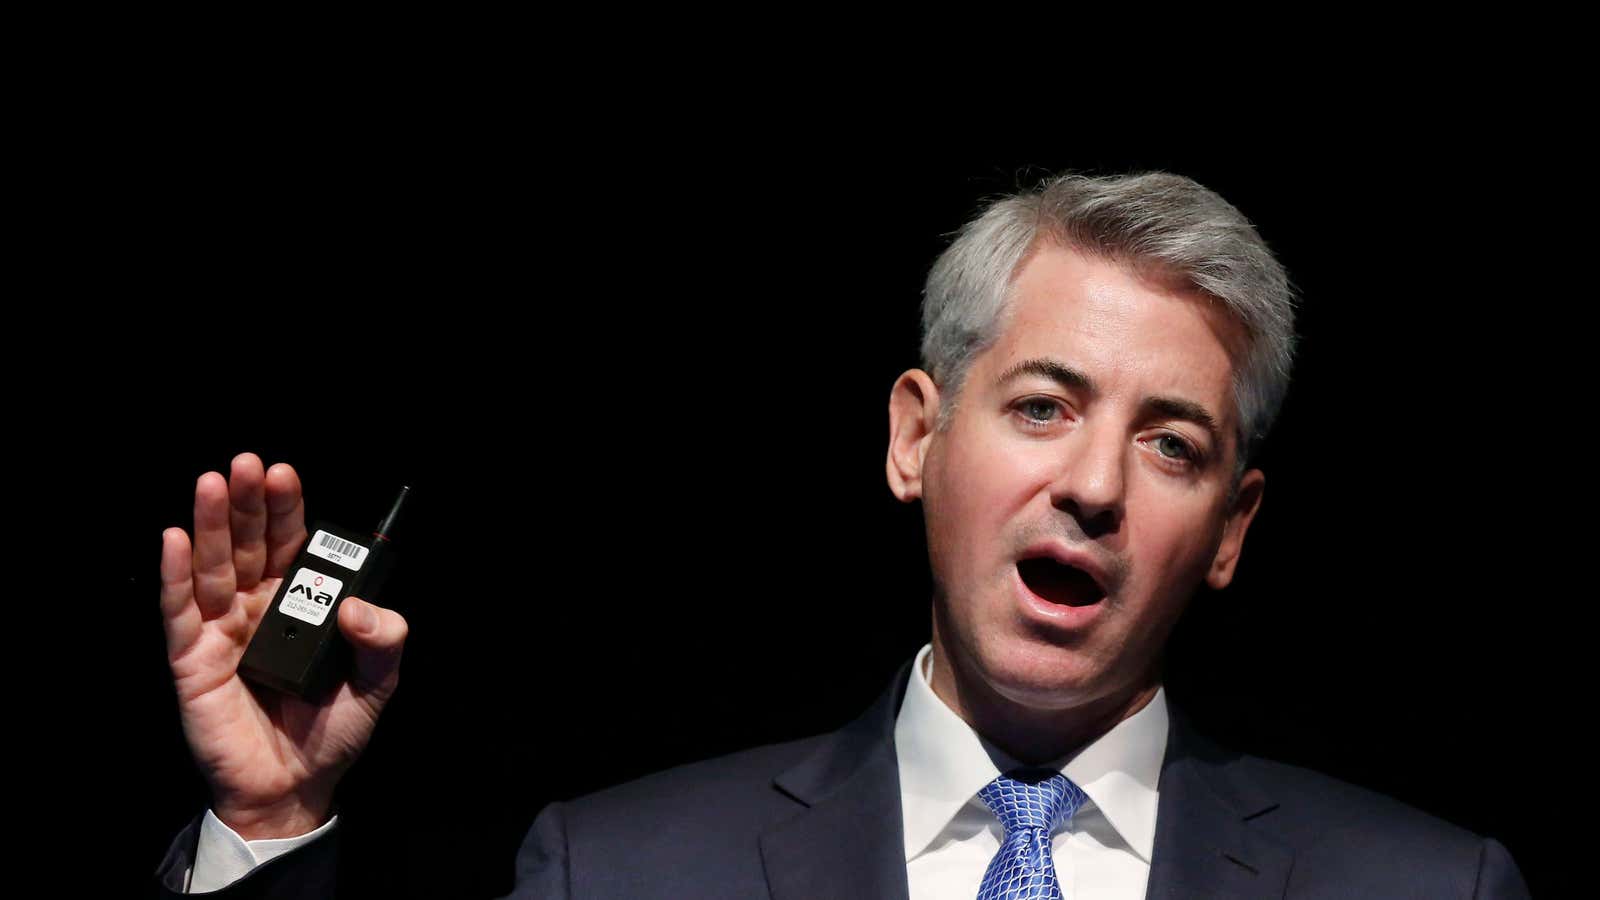 Bill Ackman’s words don’t seem to be having their desired effect.